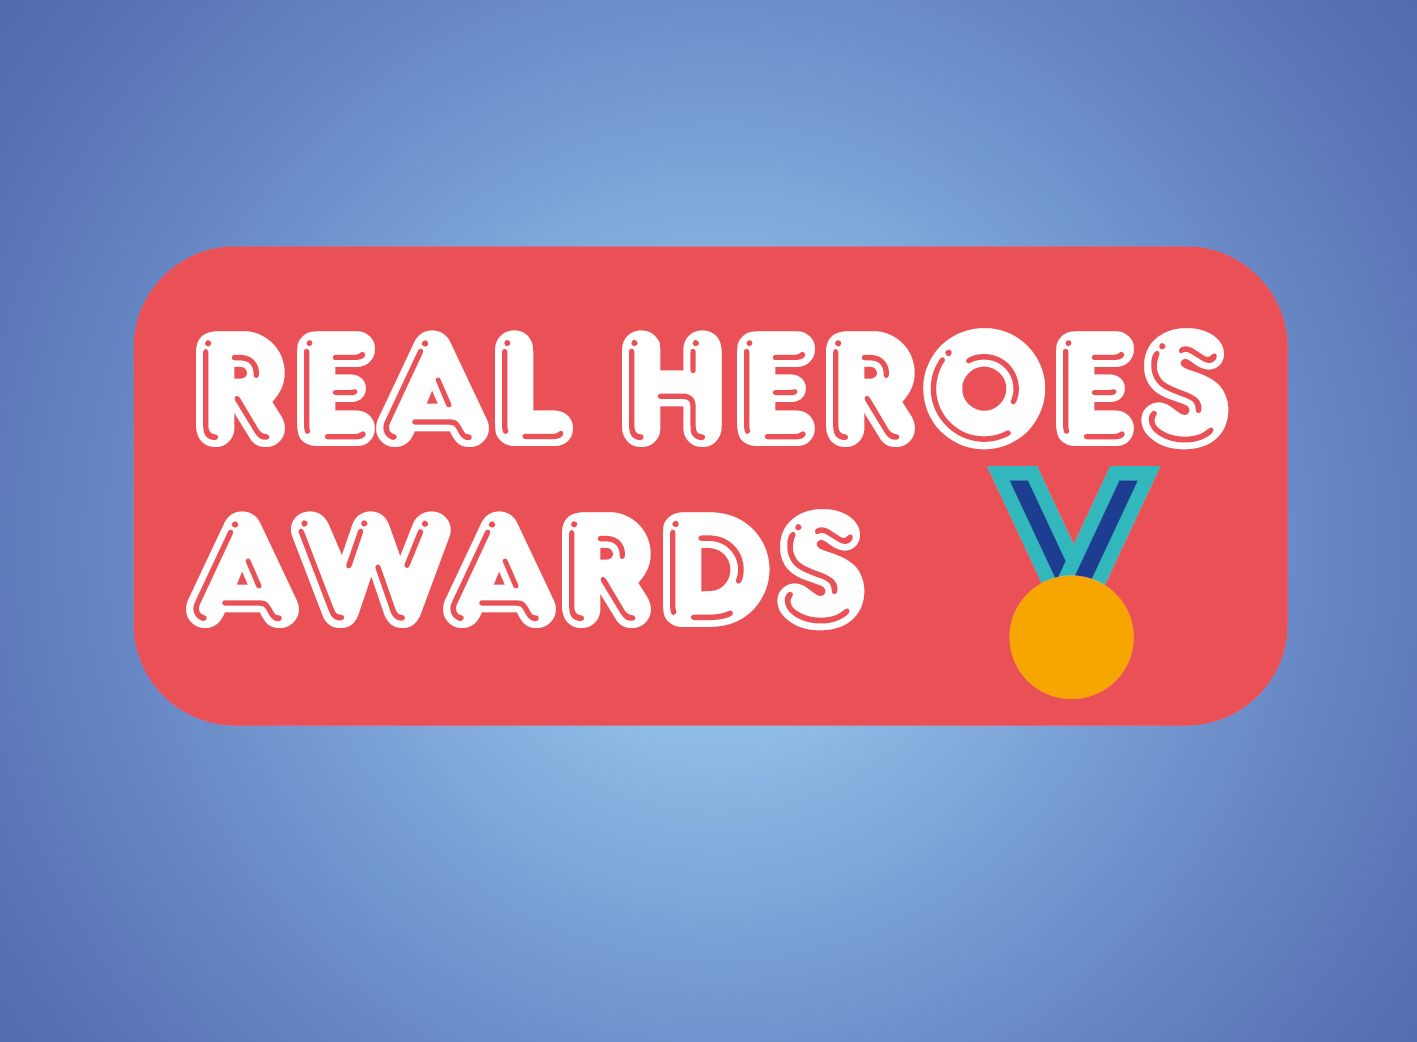 Launch of the Real Heroes Awards